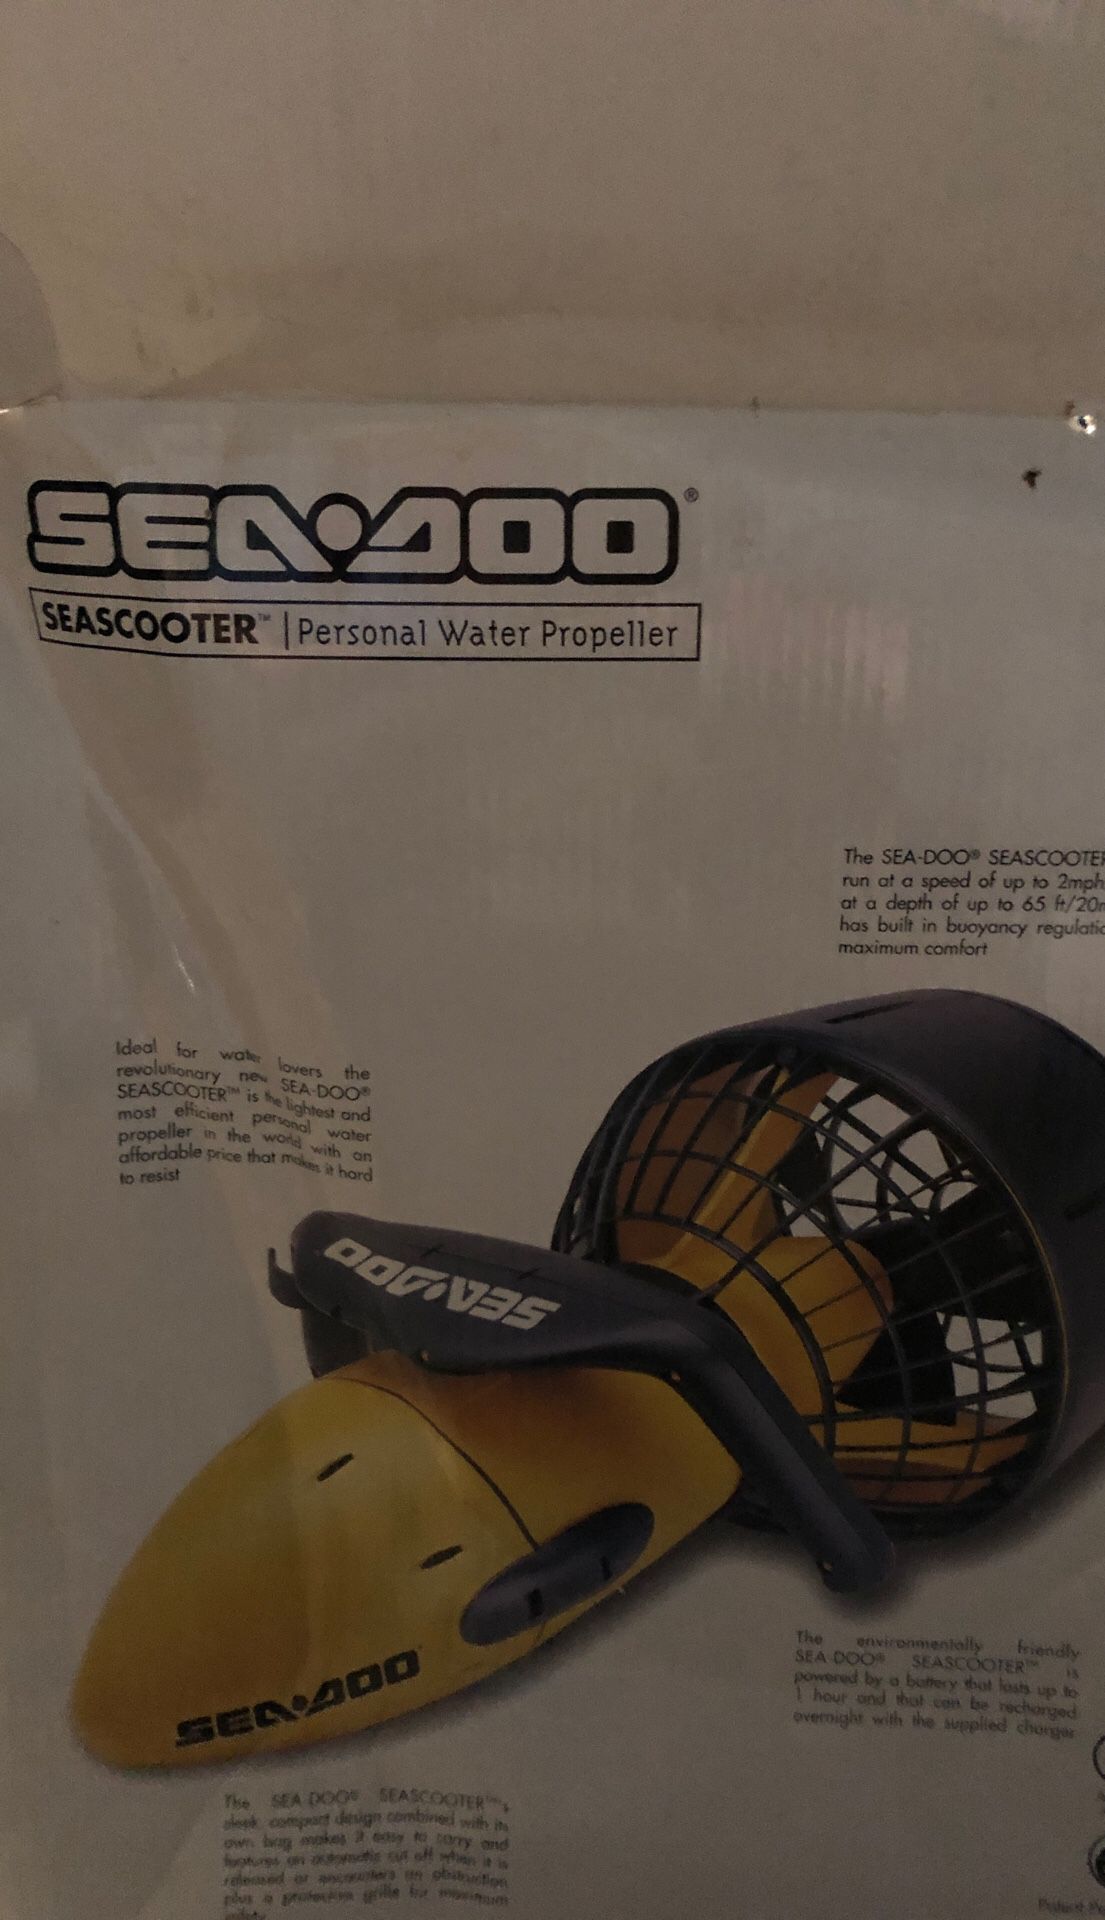 Sea Doo Sea Scooter personal water propeller. Never used brand new and brand new battery. Was a gift and will never use.